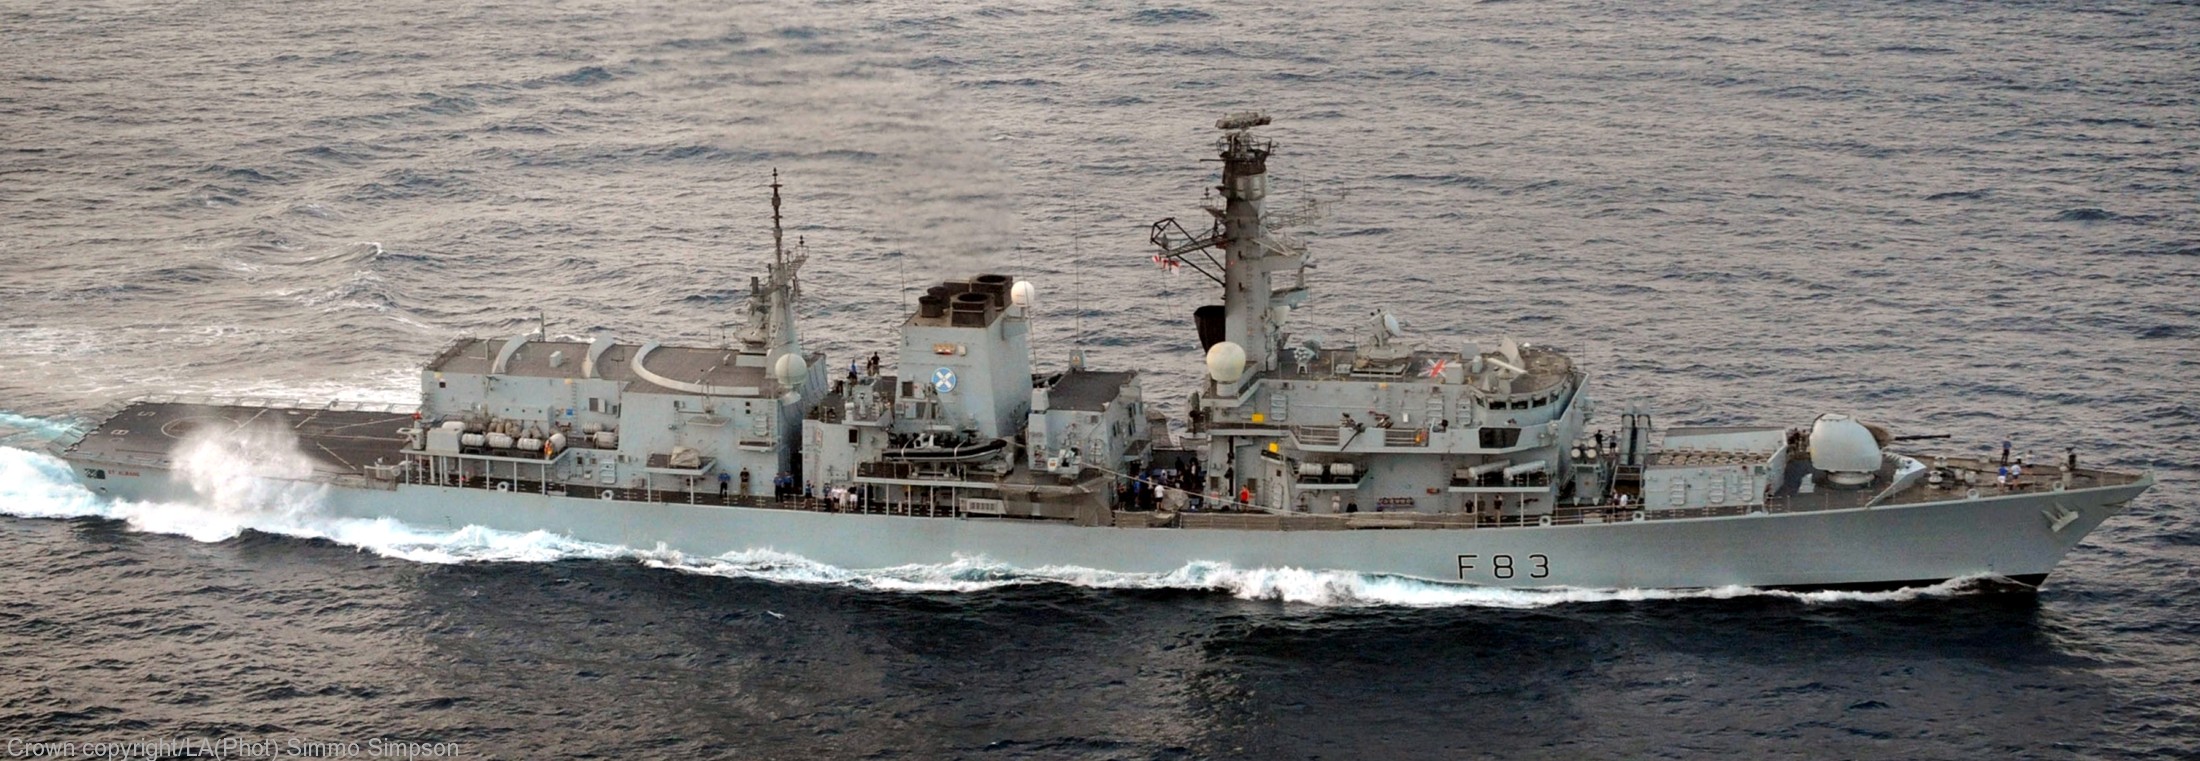 f-82 hms somerset type 23 duke class guided missile frigate ffg royal navy 05